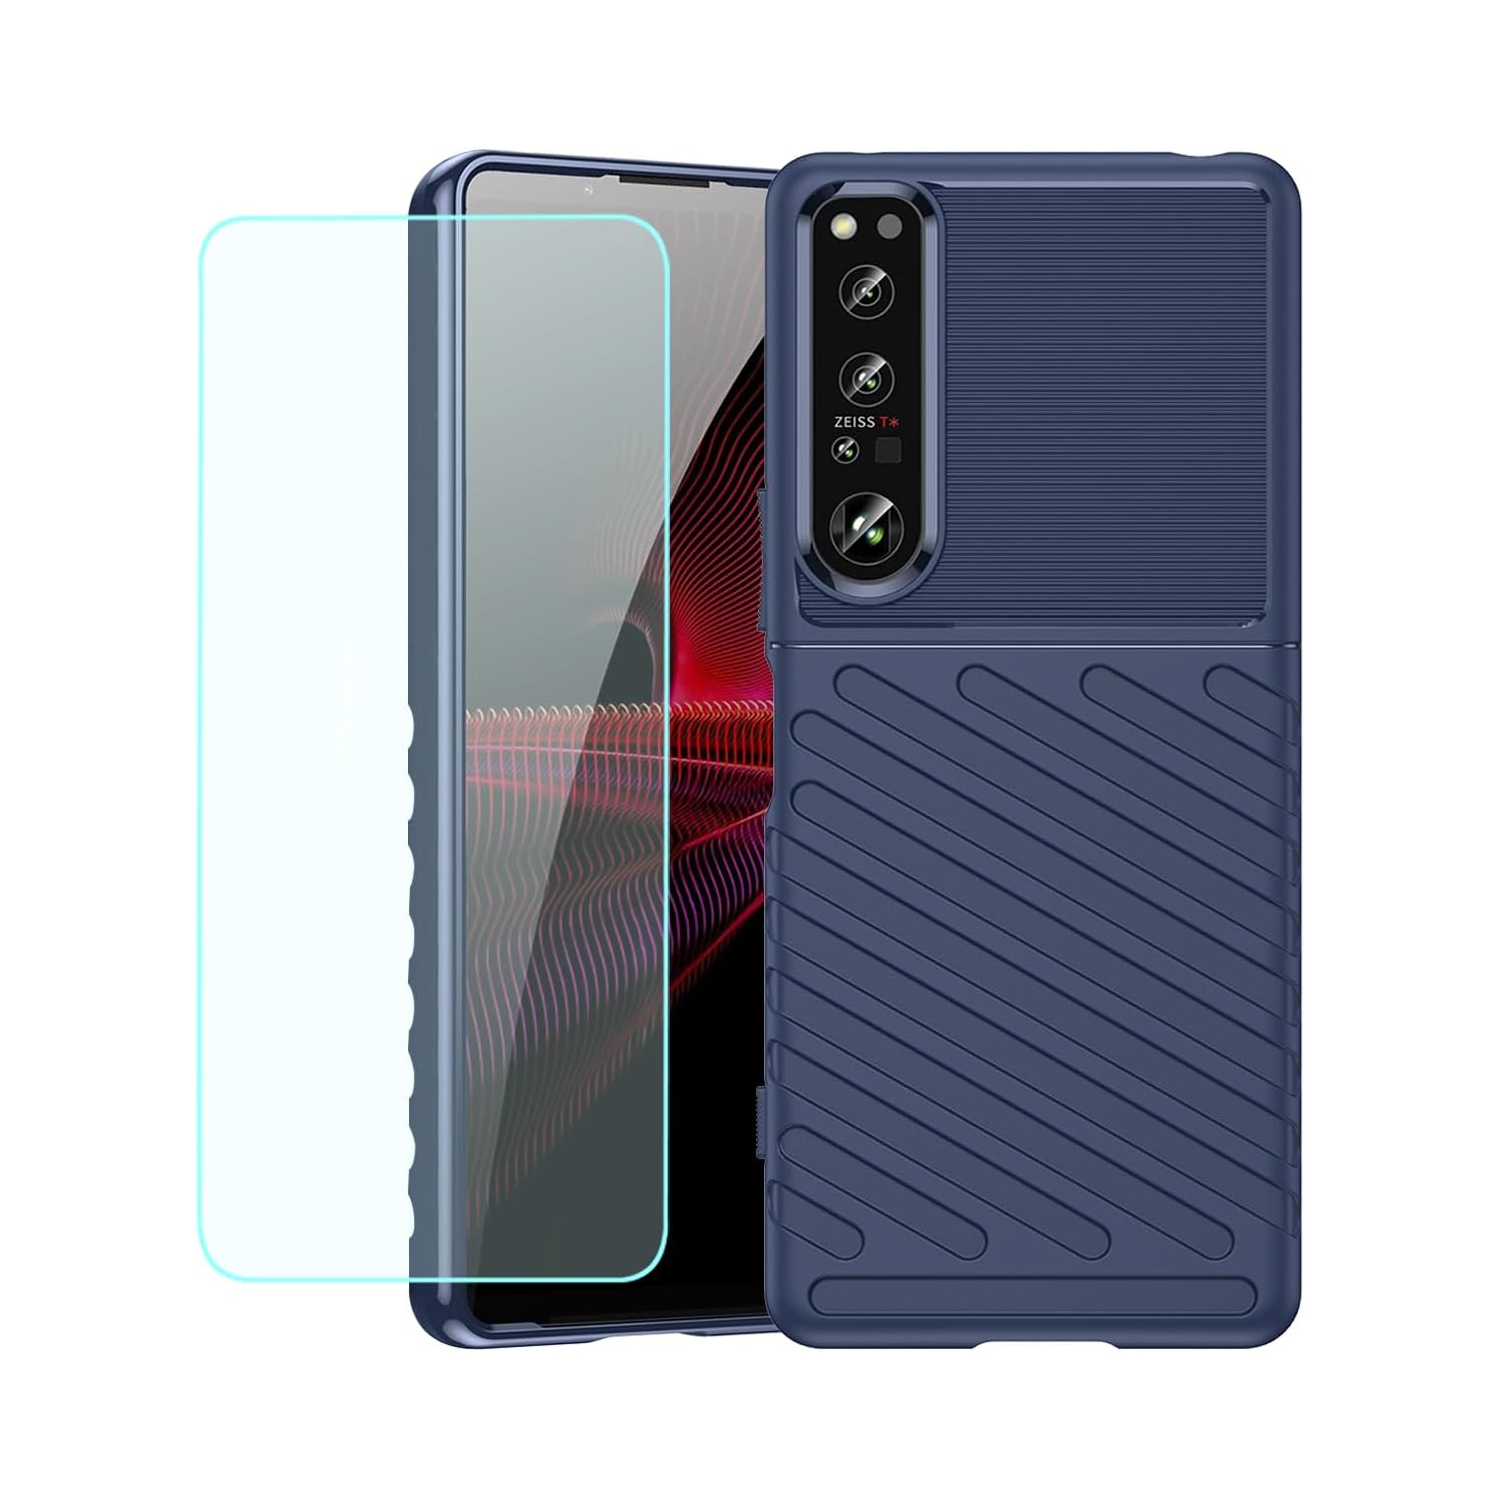 Phone Case for Xperia 1 IV 5G Case, Sony 1 IV XQ-CT72 Case with Screen Protector, Carbon Fiber Anti-Scratch